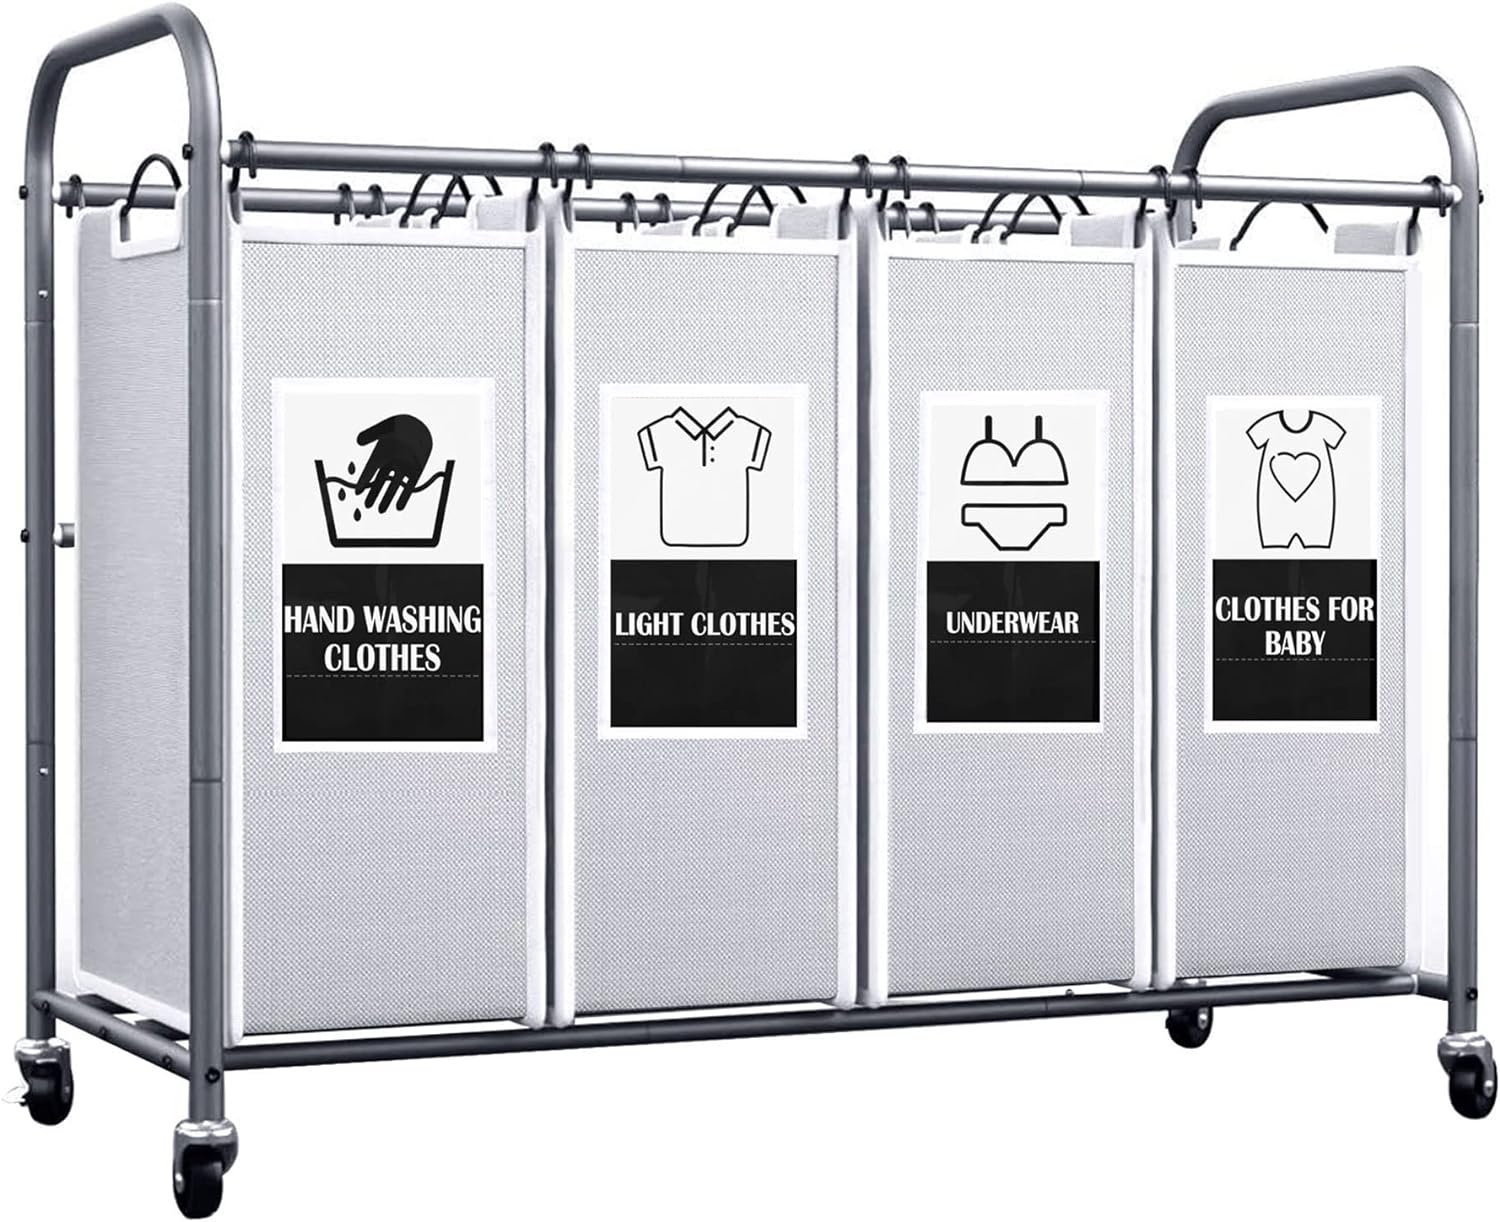 Heavy duty and works perfectly. It has wheels so you could move it from room to room on your way to the laundry. It comes with 6 printed signs but you could turn them over write own.